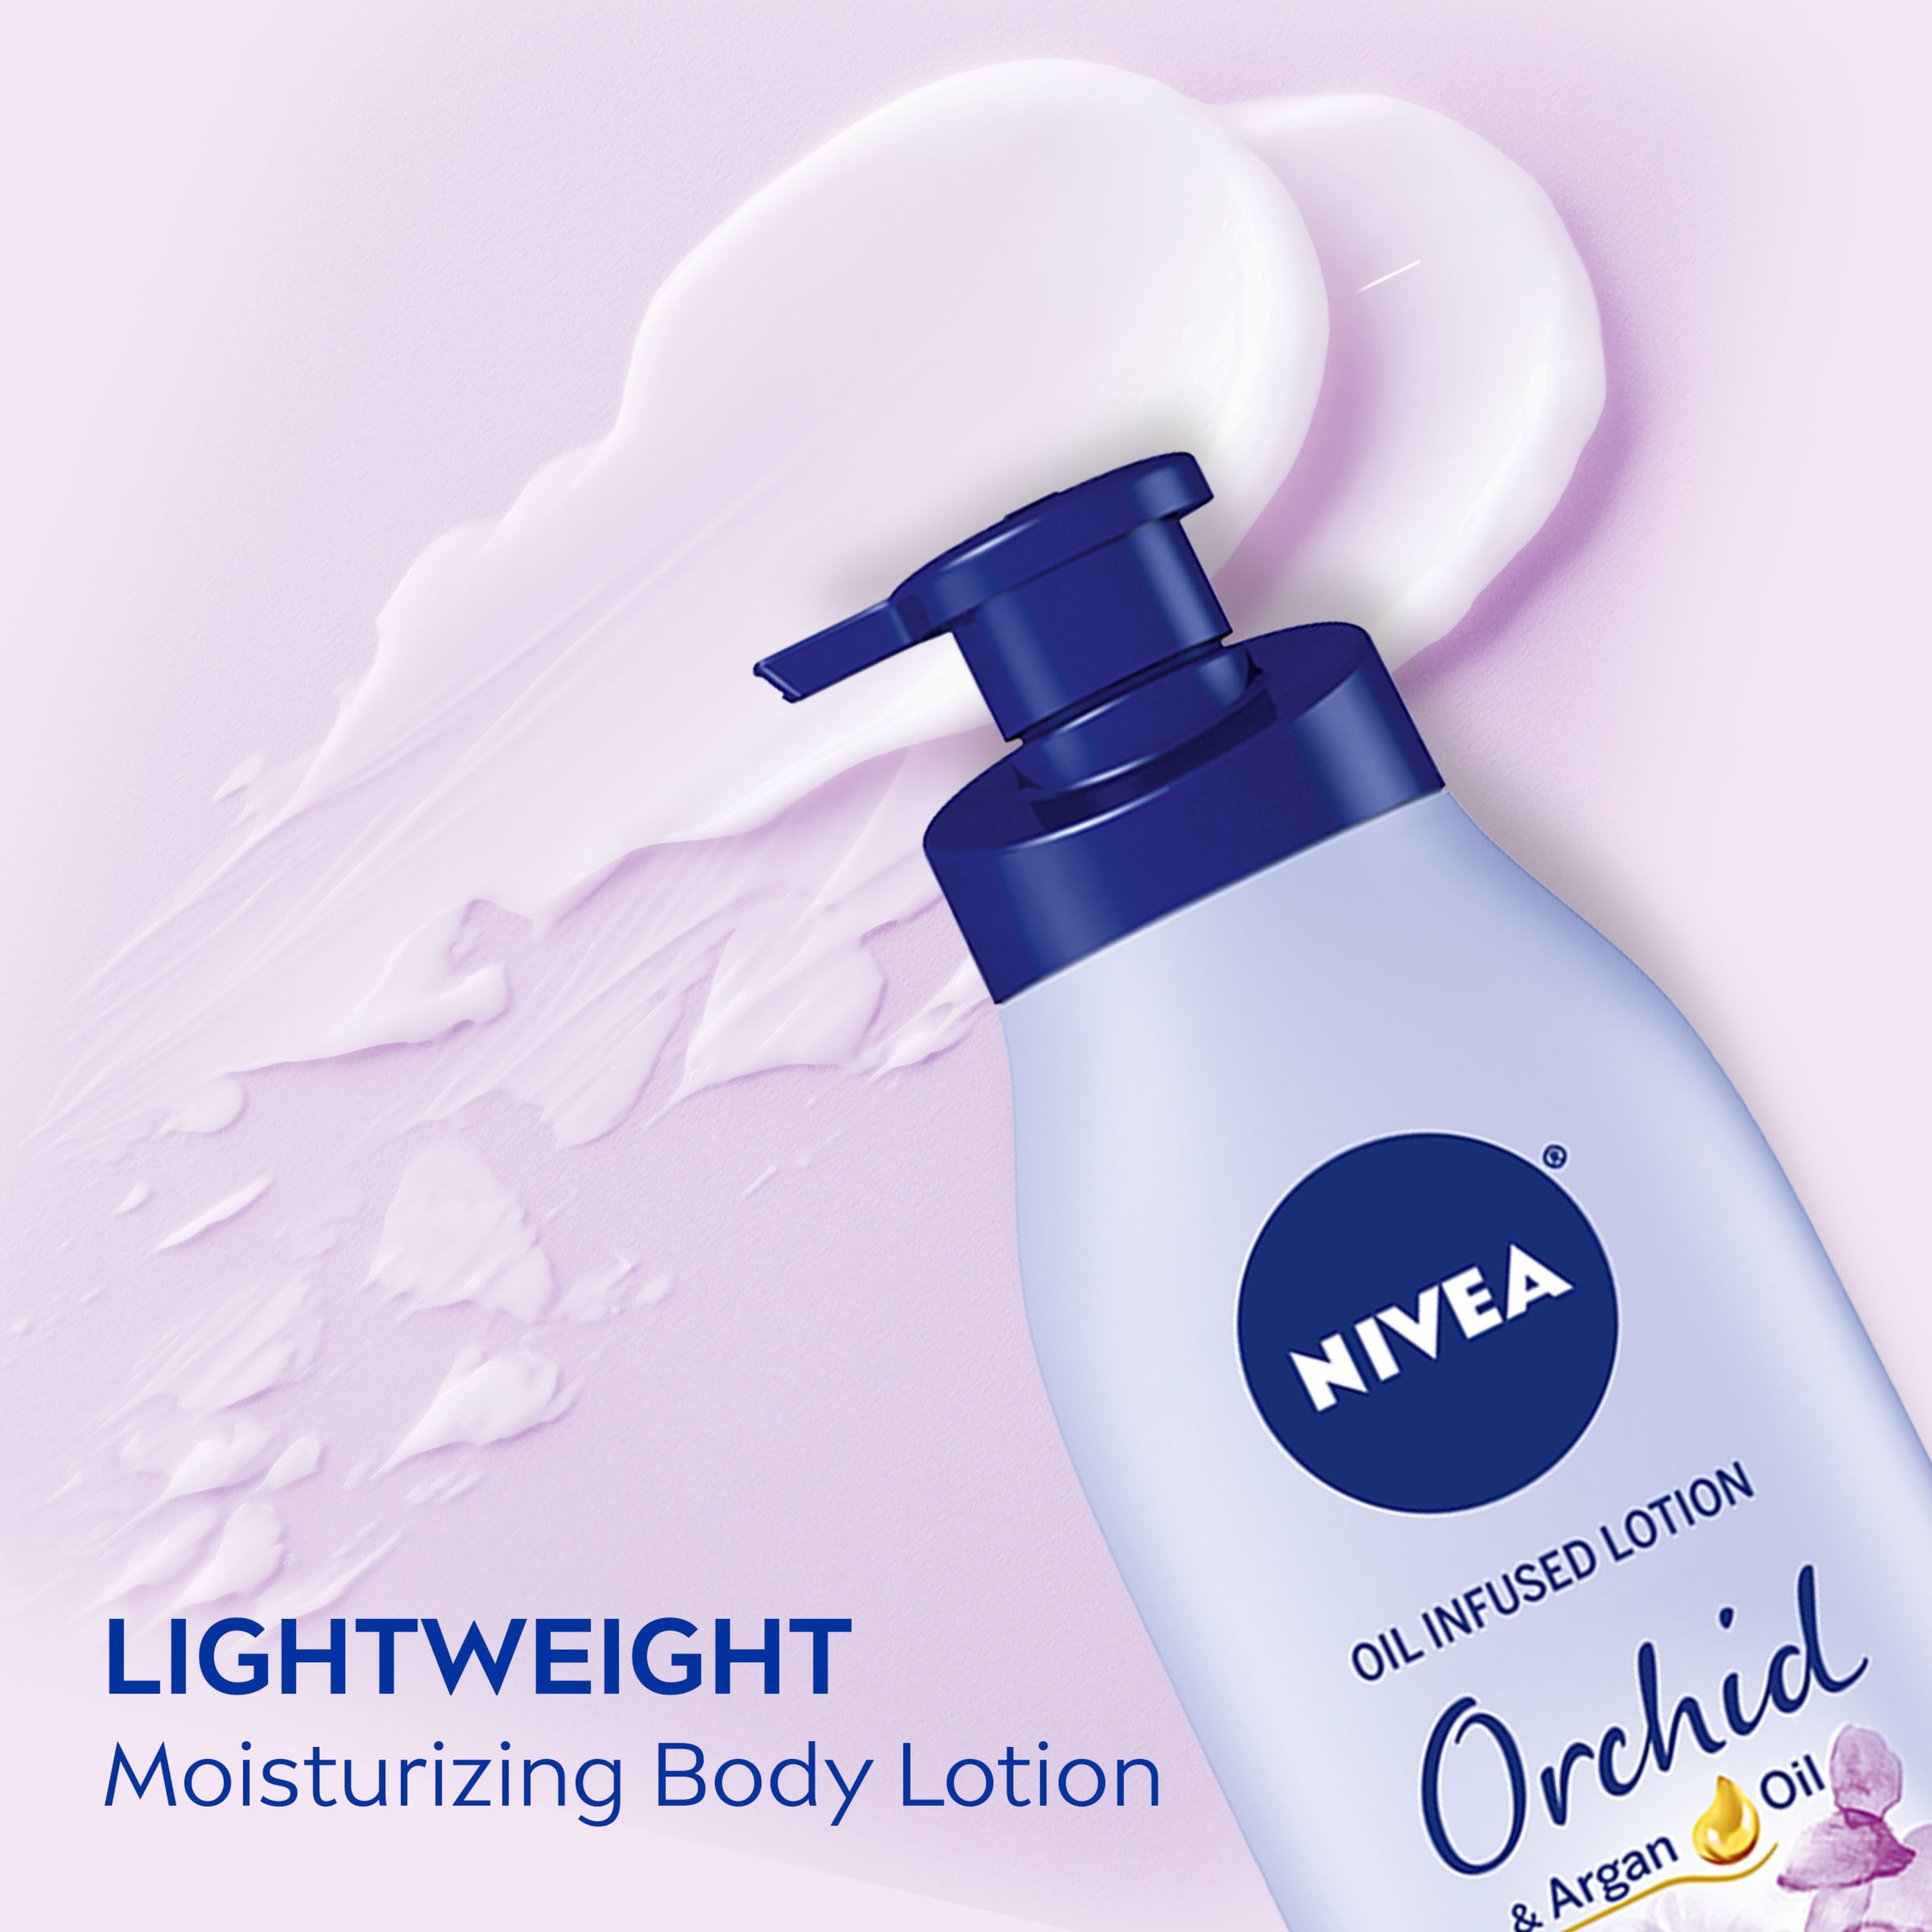 NIVEA Oil Infused Body Lotion, Orchid and Argan Oil, 16.9 Fl Oz Pump Bottle - image 3 of 14